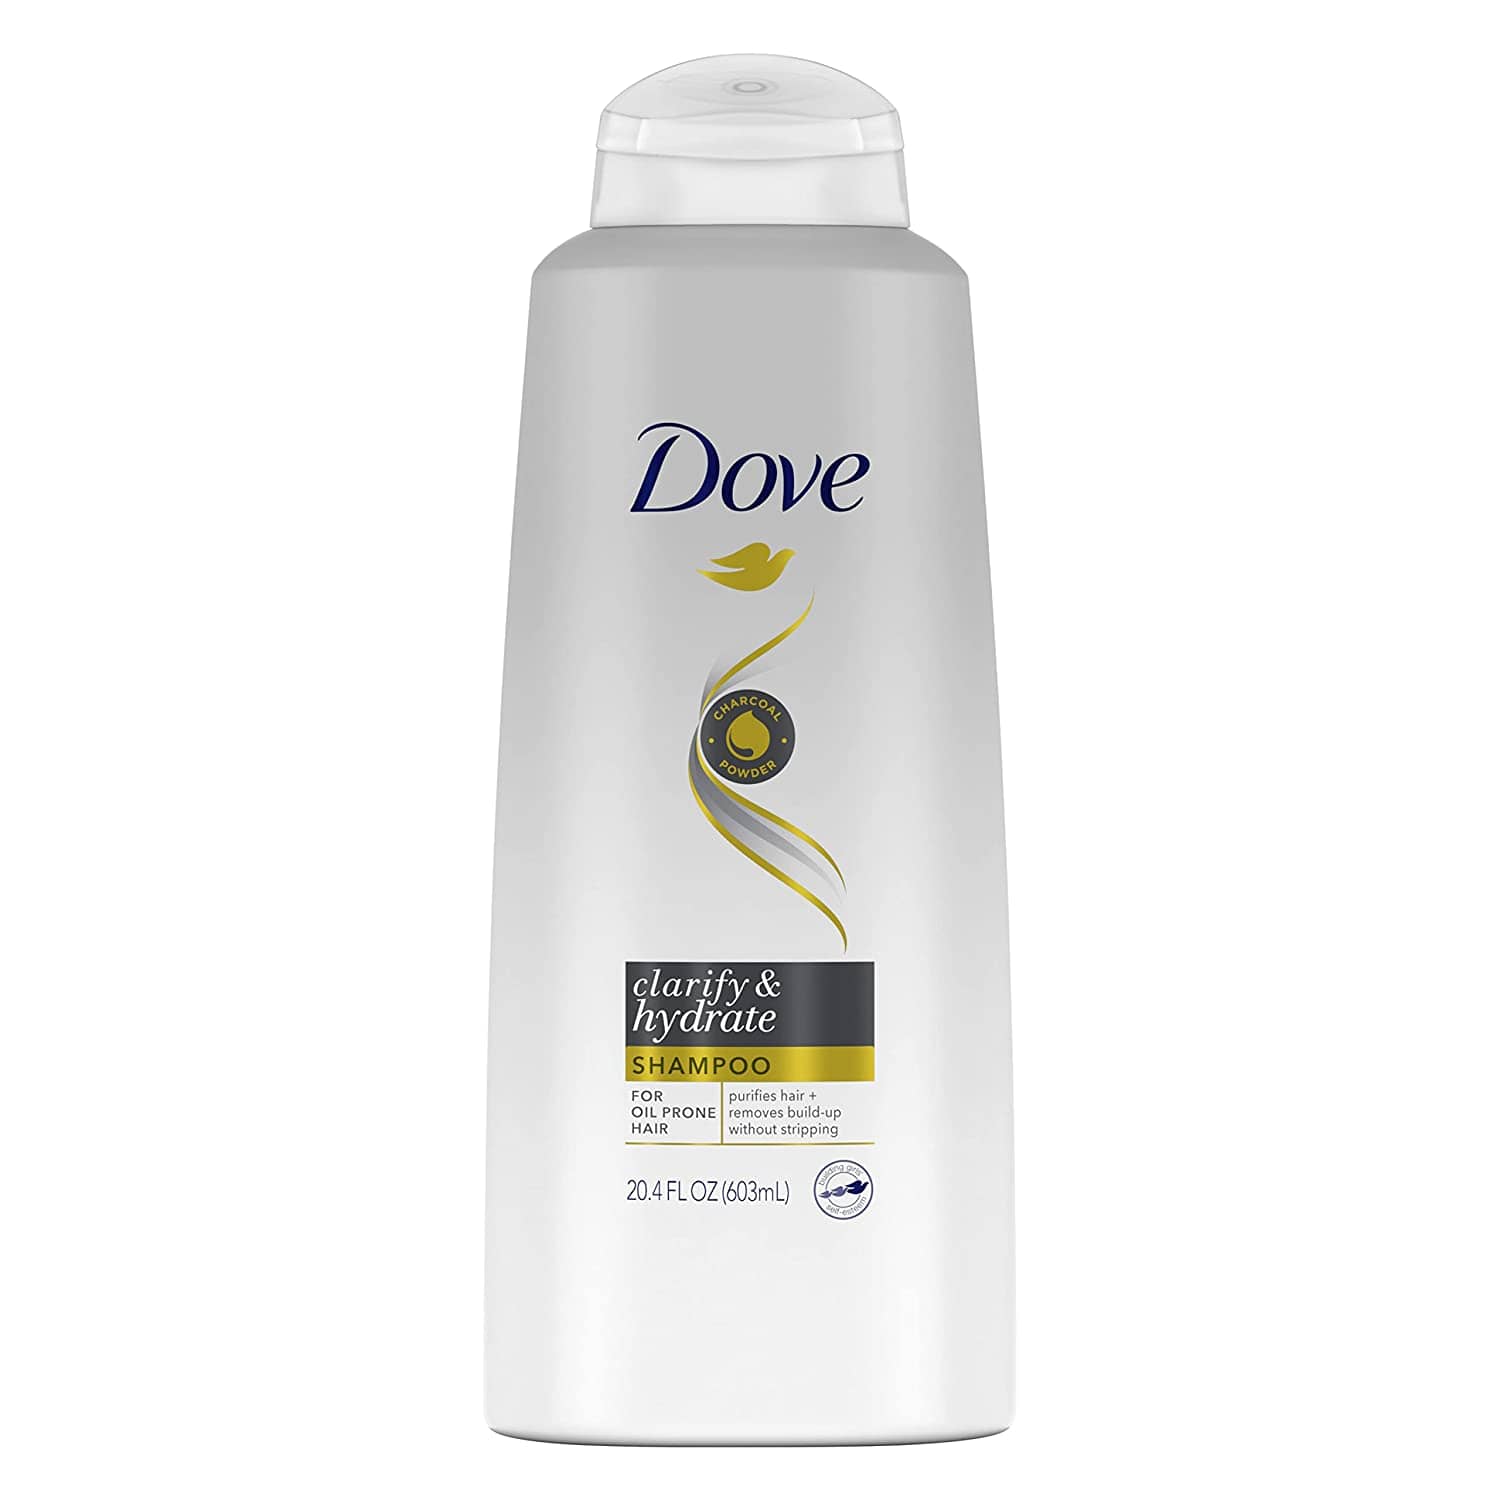 Dove Shampoo for Oily Hair Clarify & Hydrate With Charcoal to Purify Hair and Remove Build-up Without Stripping Hair